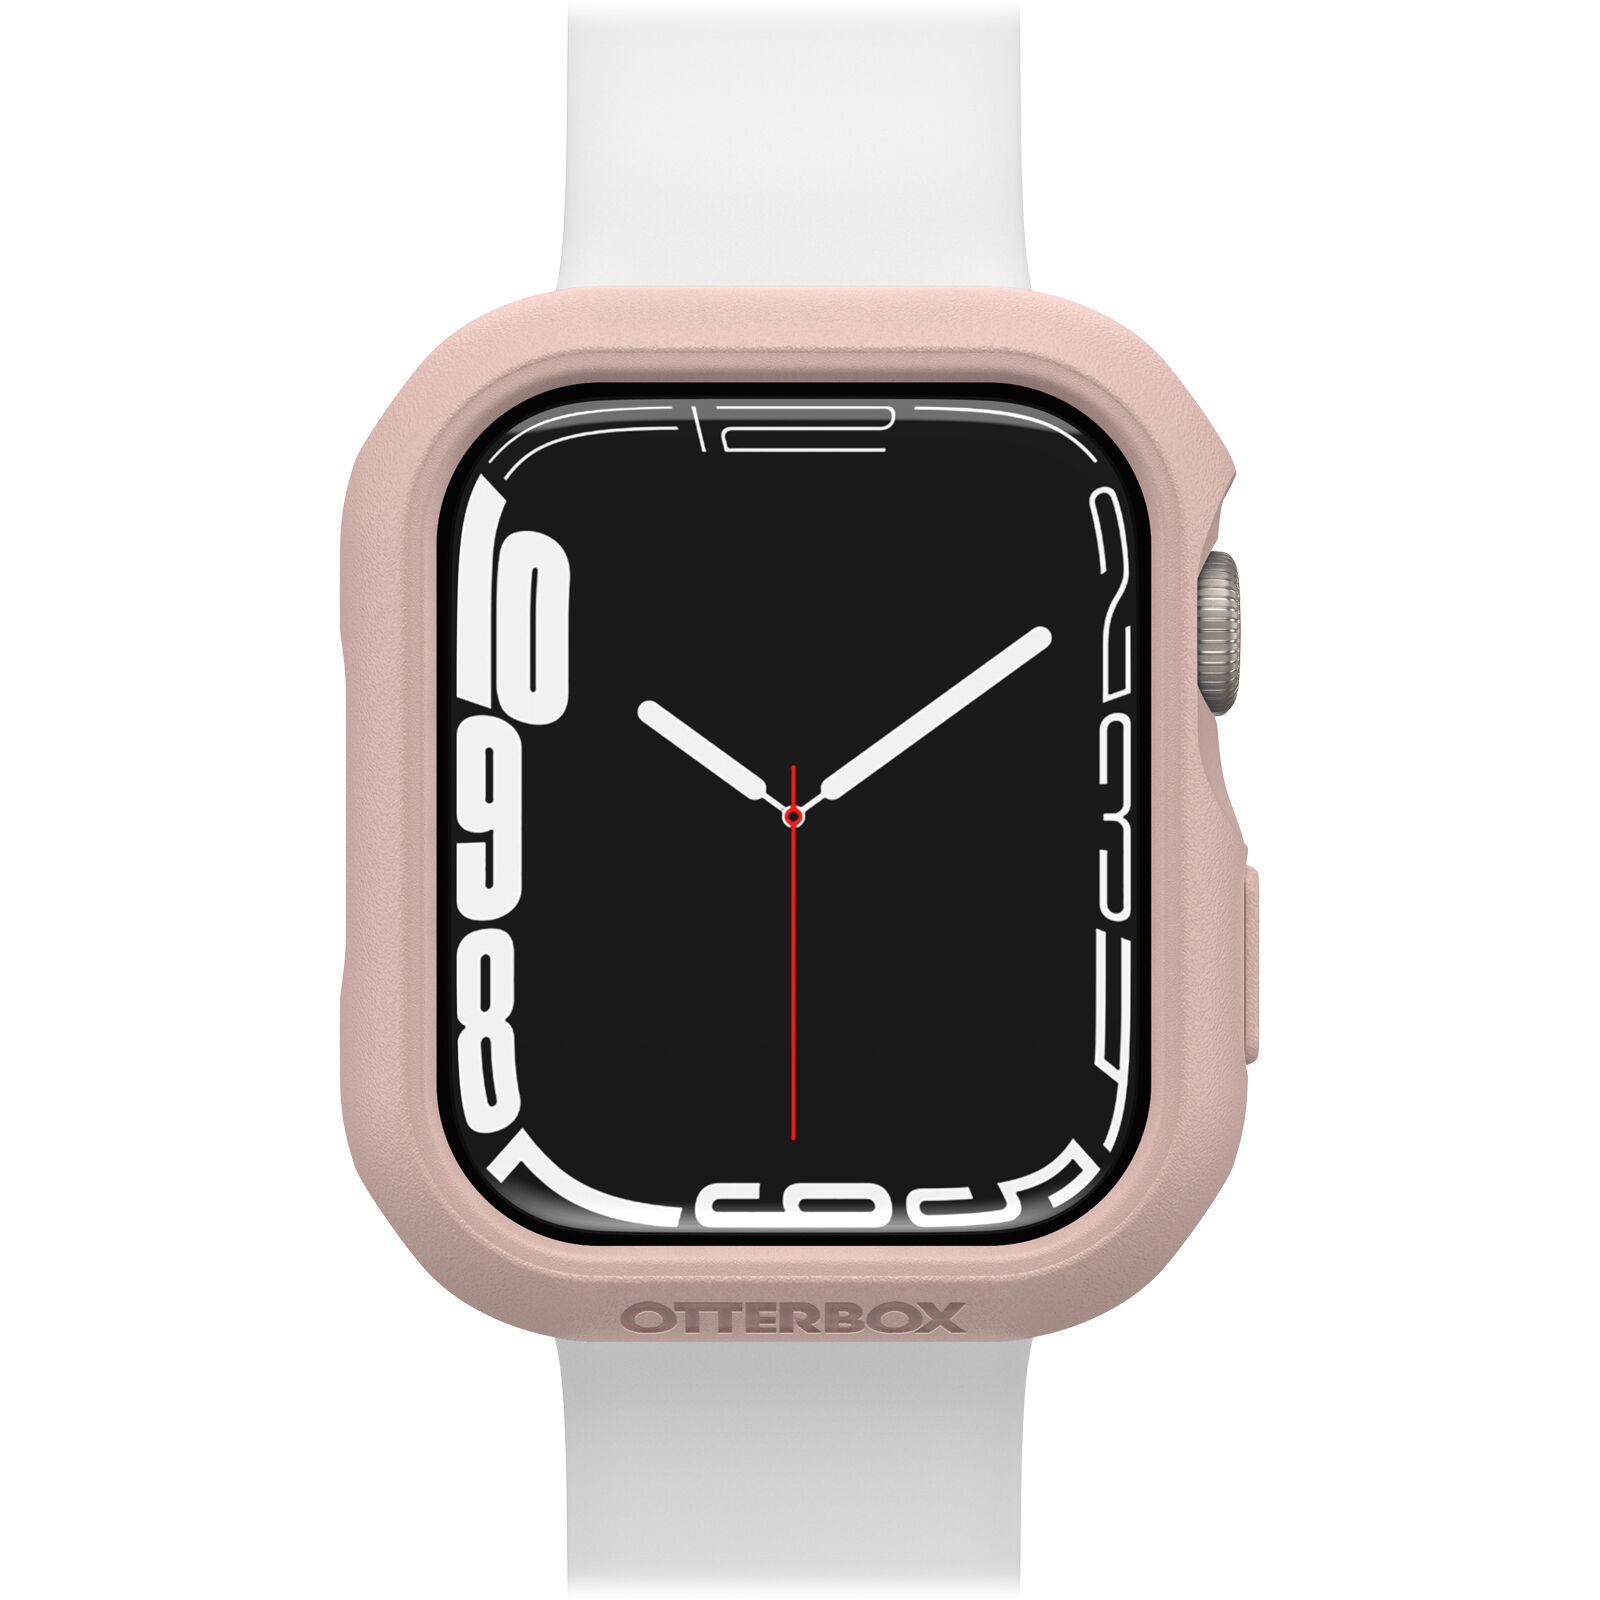 Pink Apple Watch Protective Case | OtterBox Cases for Apple